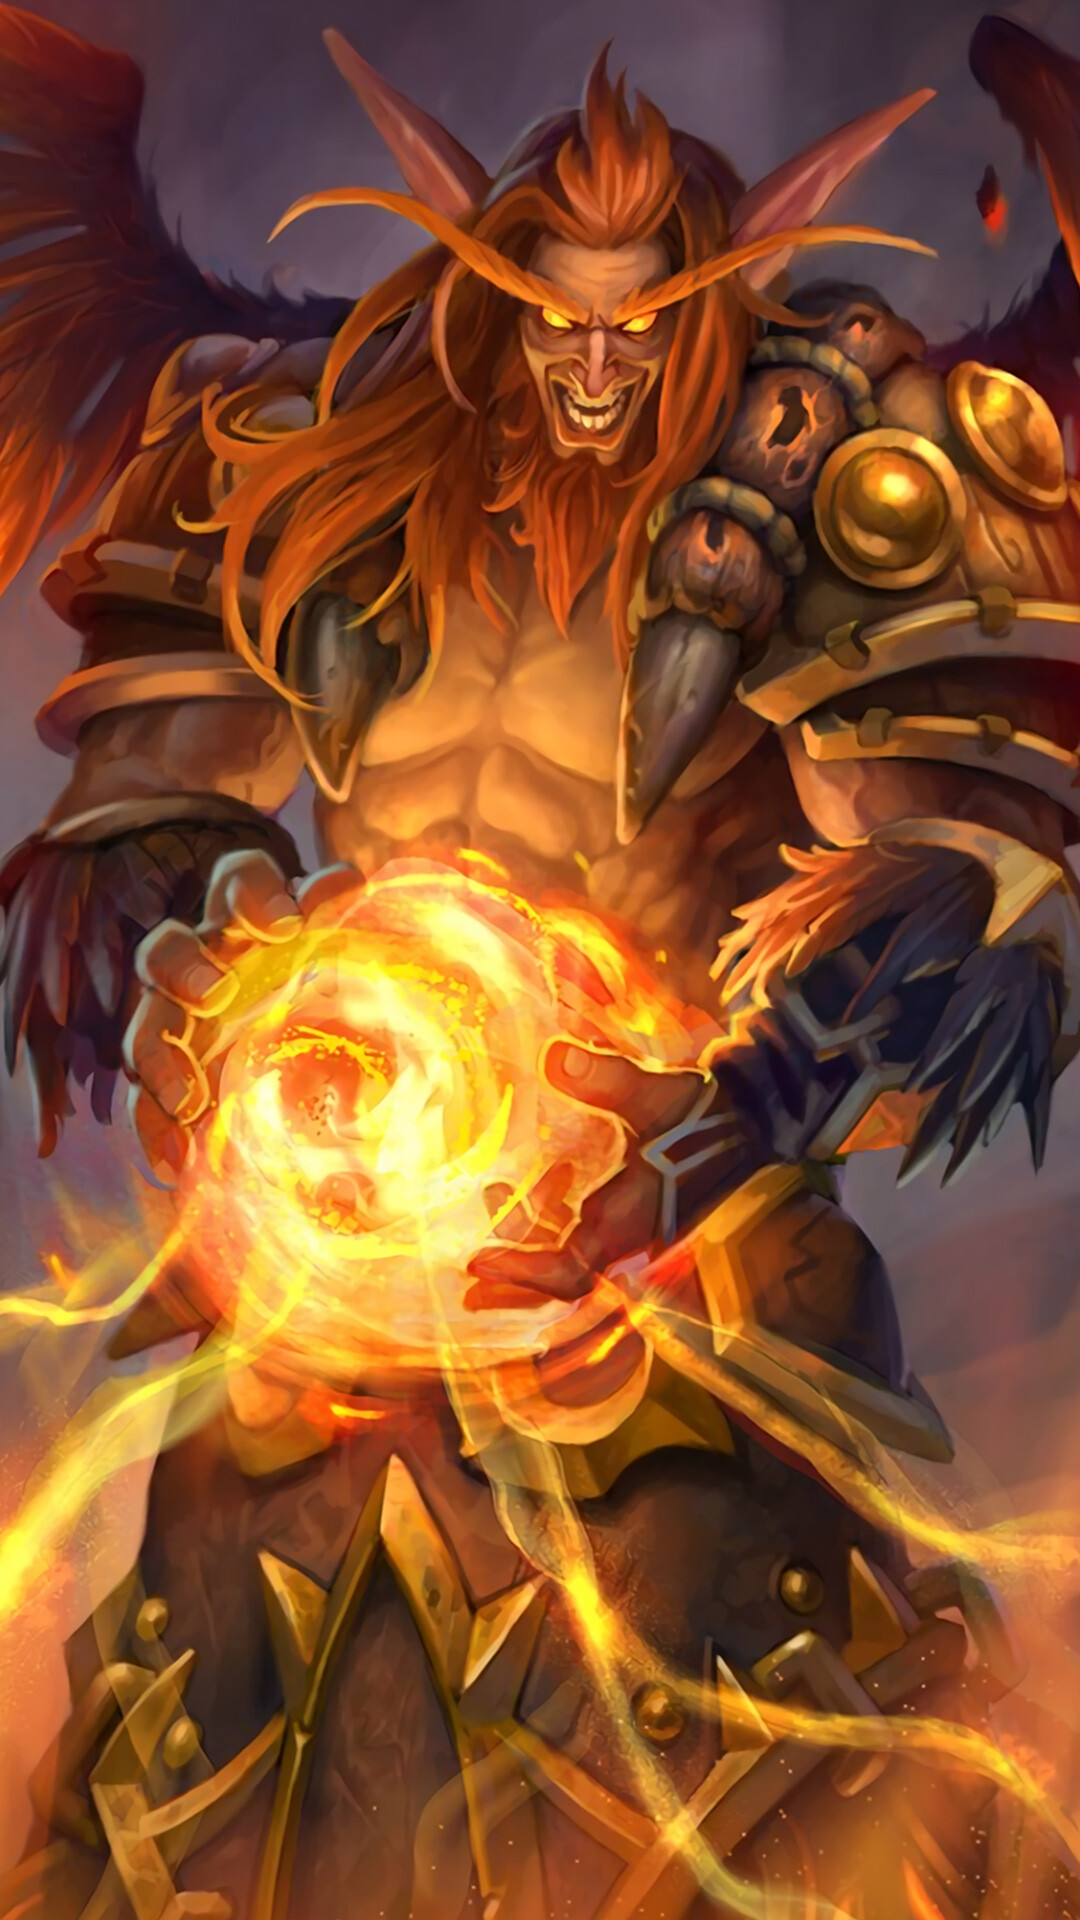 Hearthstone: Fandral Staghelm, A legendary druid minion card, from the Whispers of the Old Gods set. 1080x1920 Full HD Wallpaper.